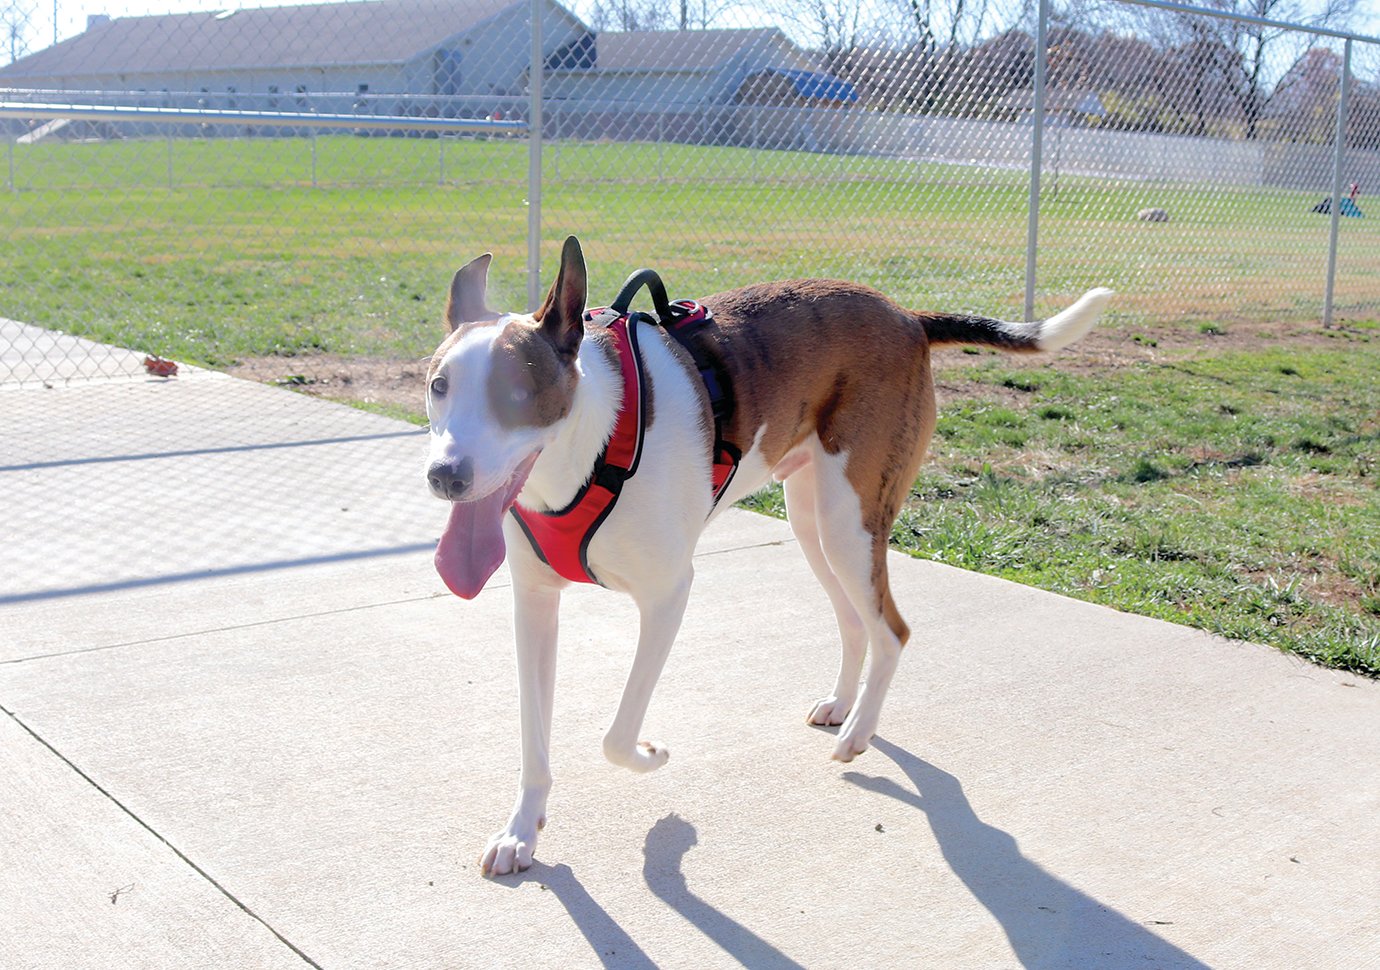 Four-year-old Rosie, named "Rosie Red" after the Cincinnati Reds baseball team, enjoys some free time Friday at the Crawfordsville Dog Park located at the Animal Welfare League.